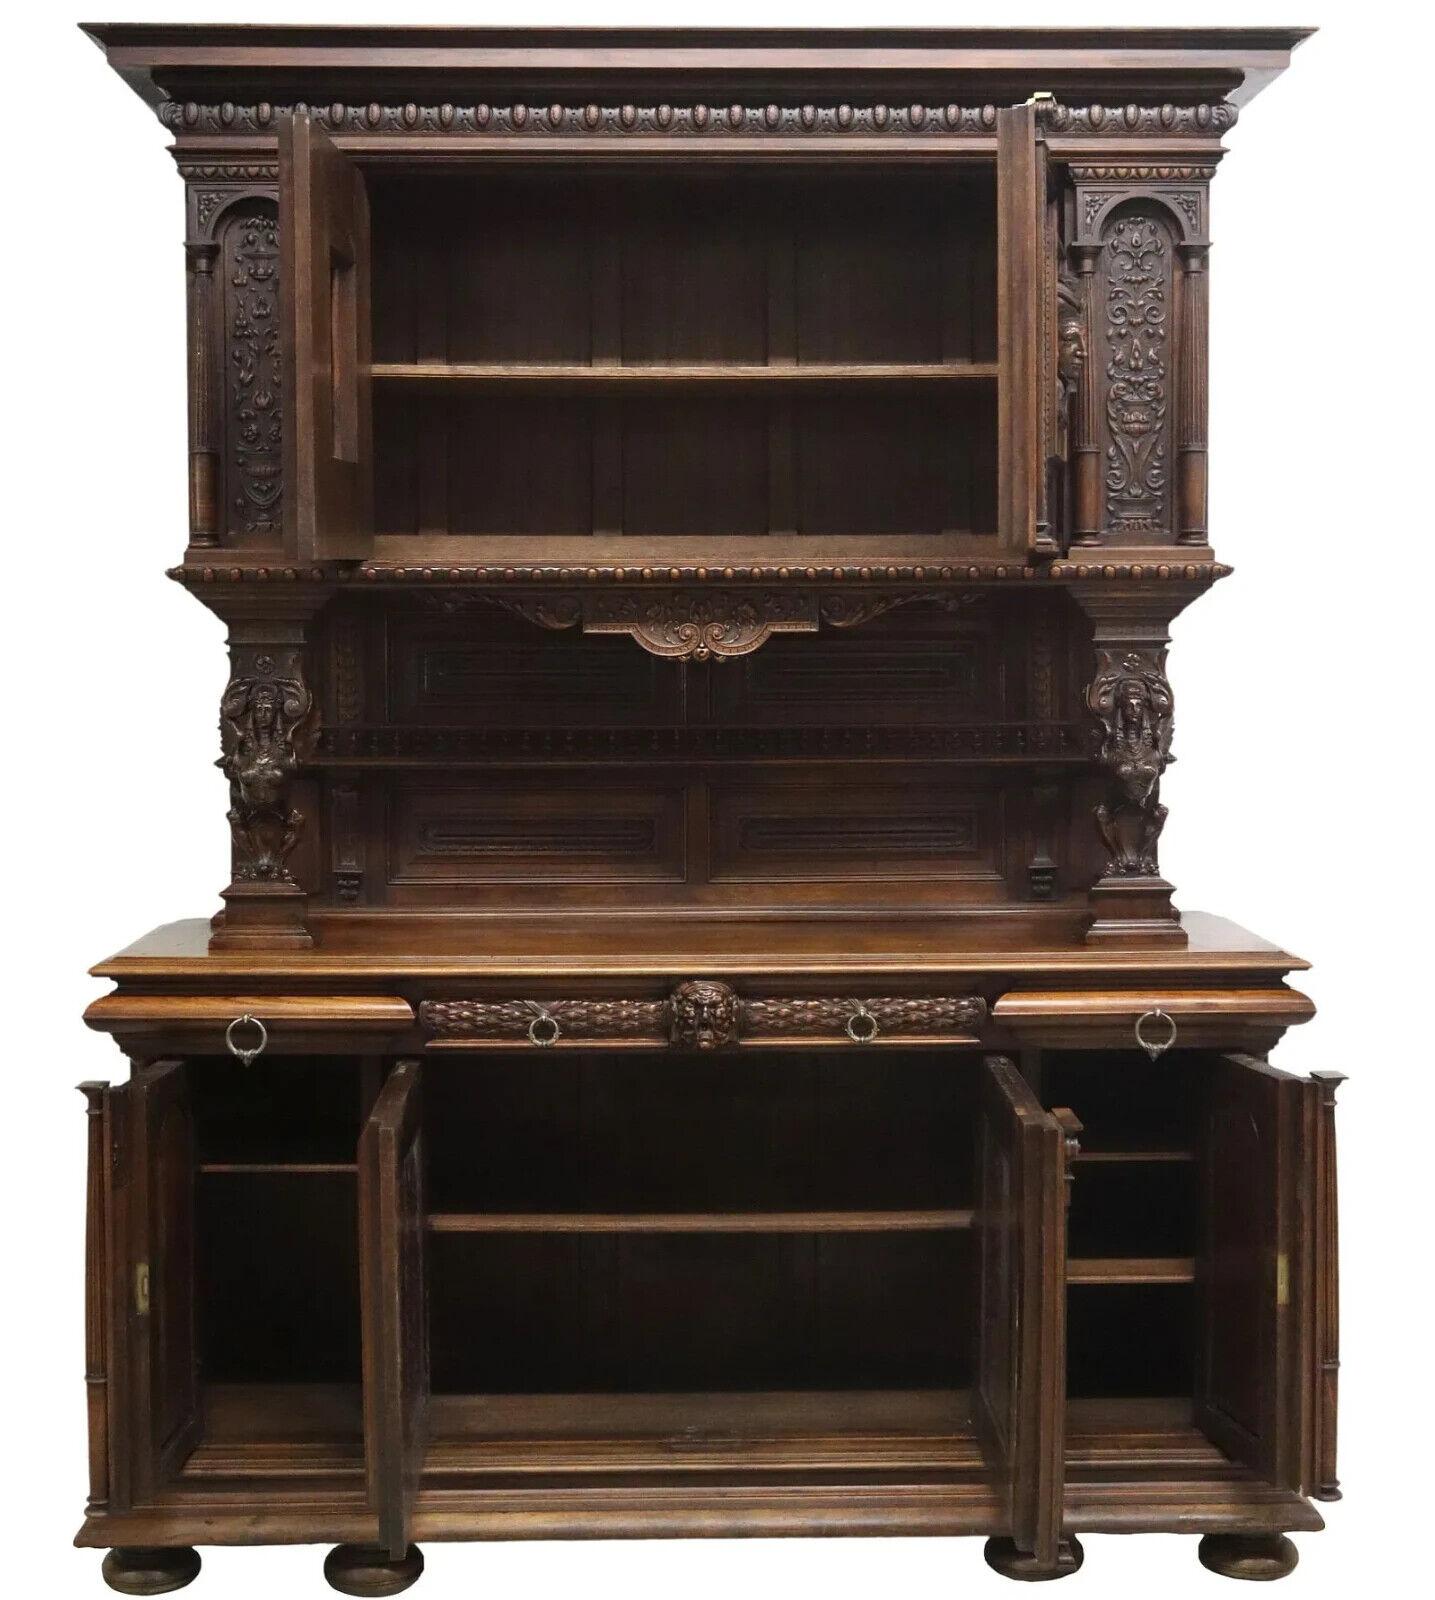 Very Handsome 1800s Antique Signed, Chaput, French Ren Revival, Well-Carved Walnut, Sideboard!

Antique Sideboard, Signed, Chaput, French Renaissance Revival, Well-Carved Walnut, 1800s, 19th Century!!

Add a touch of history to your dining room with